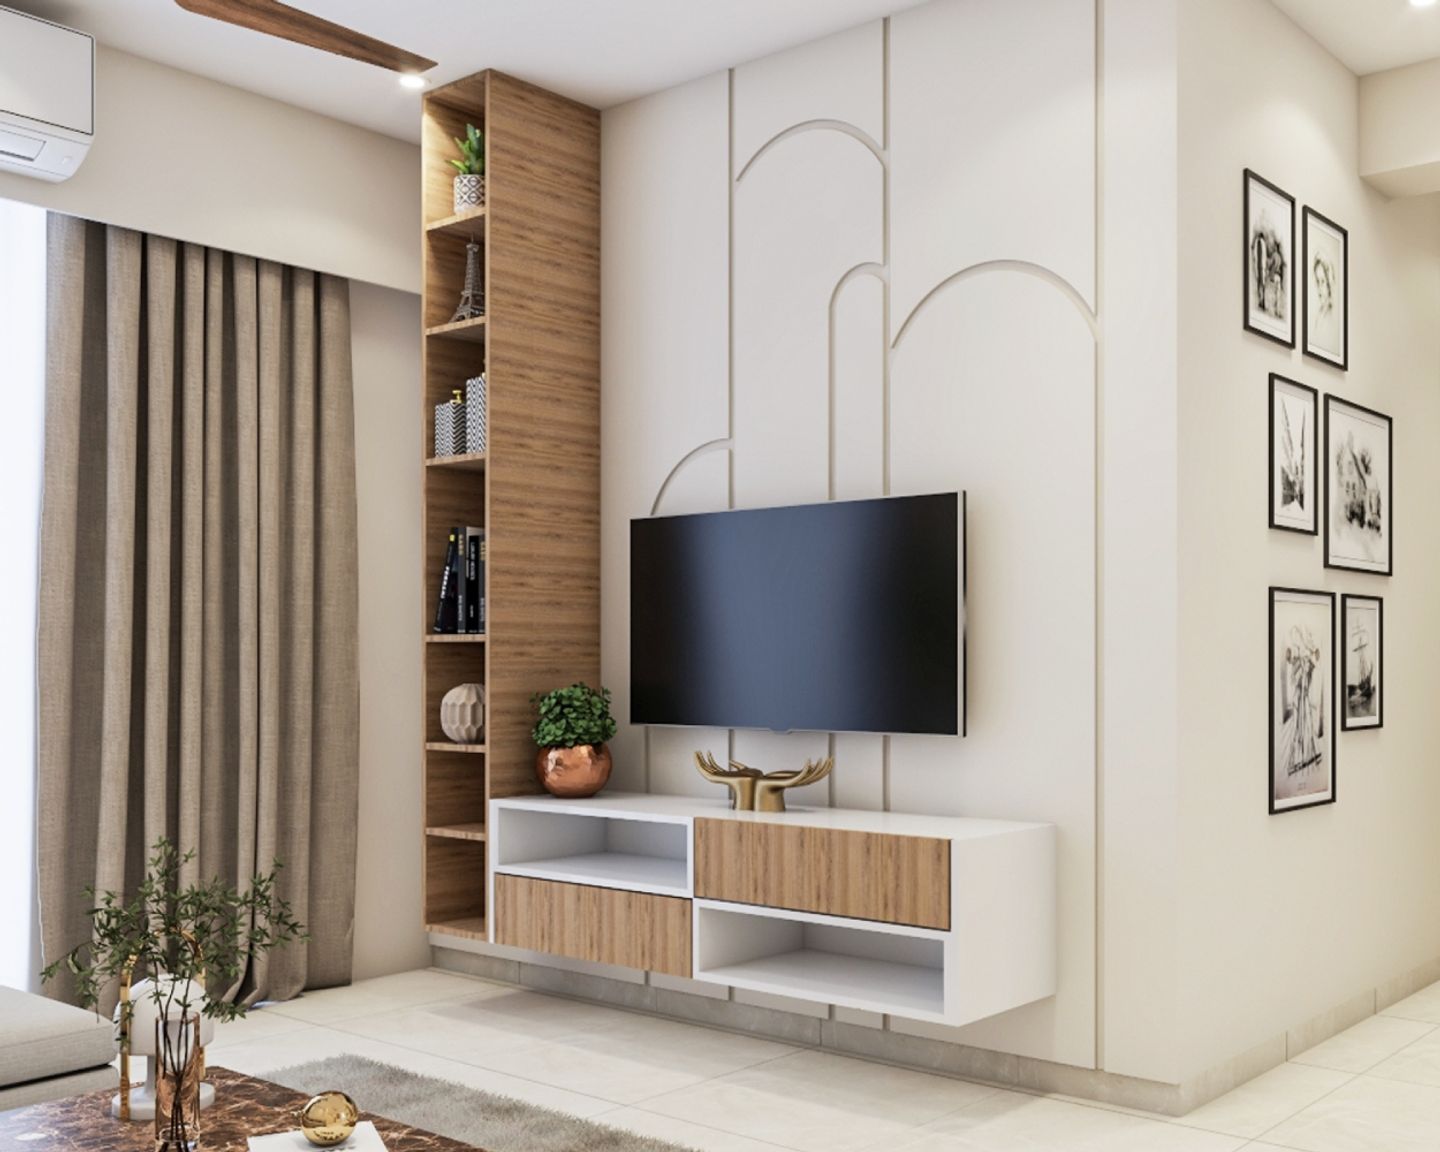 White And Wood TV Unit Desgn With Contemporary Aesthetics And White Grooved Accent Wall - Livspace